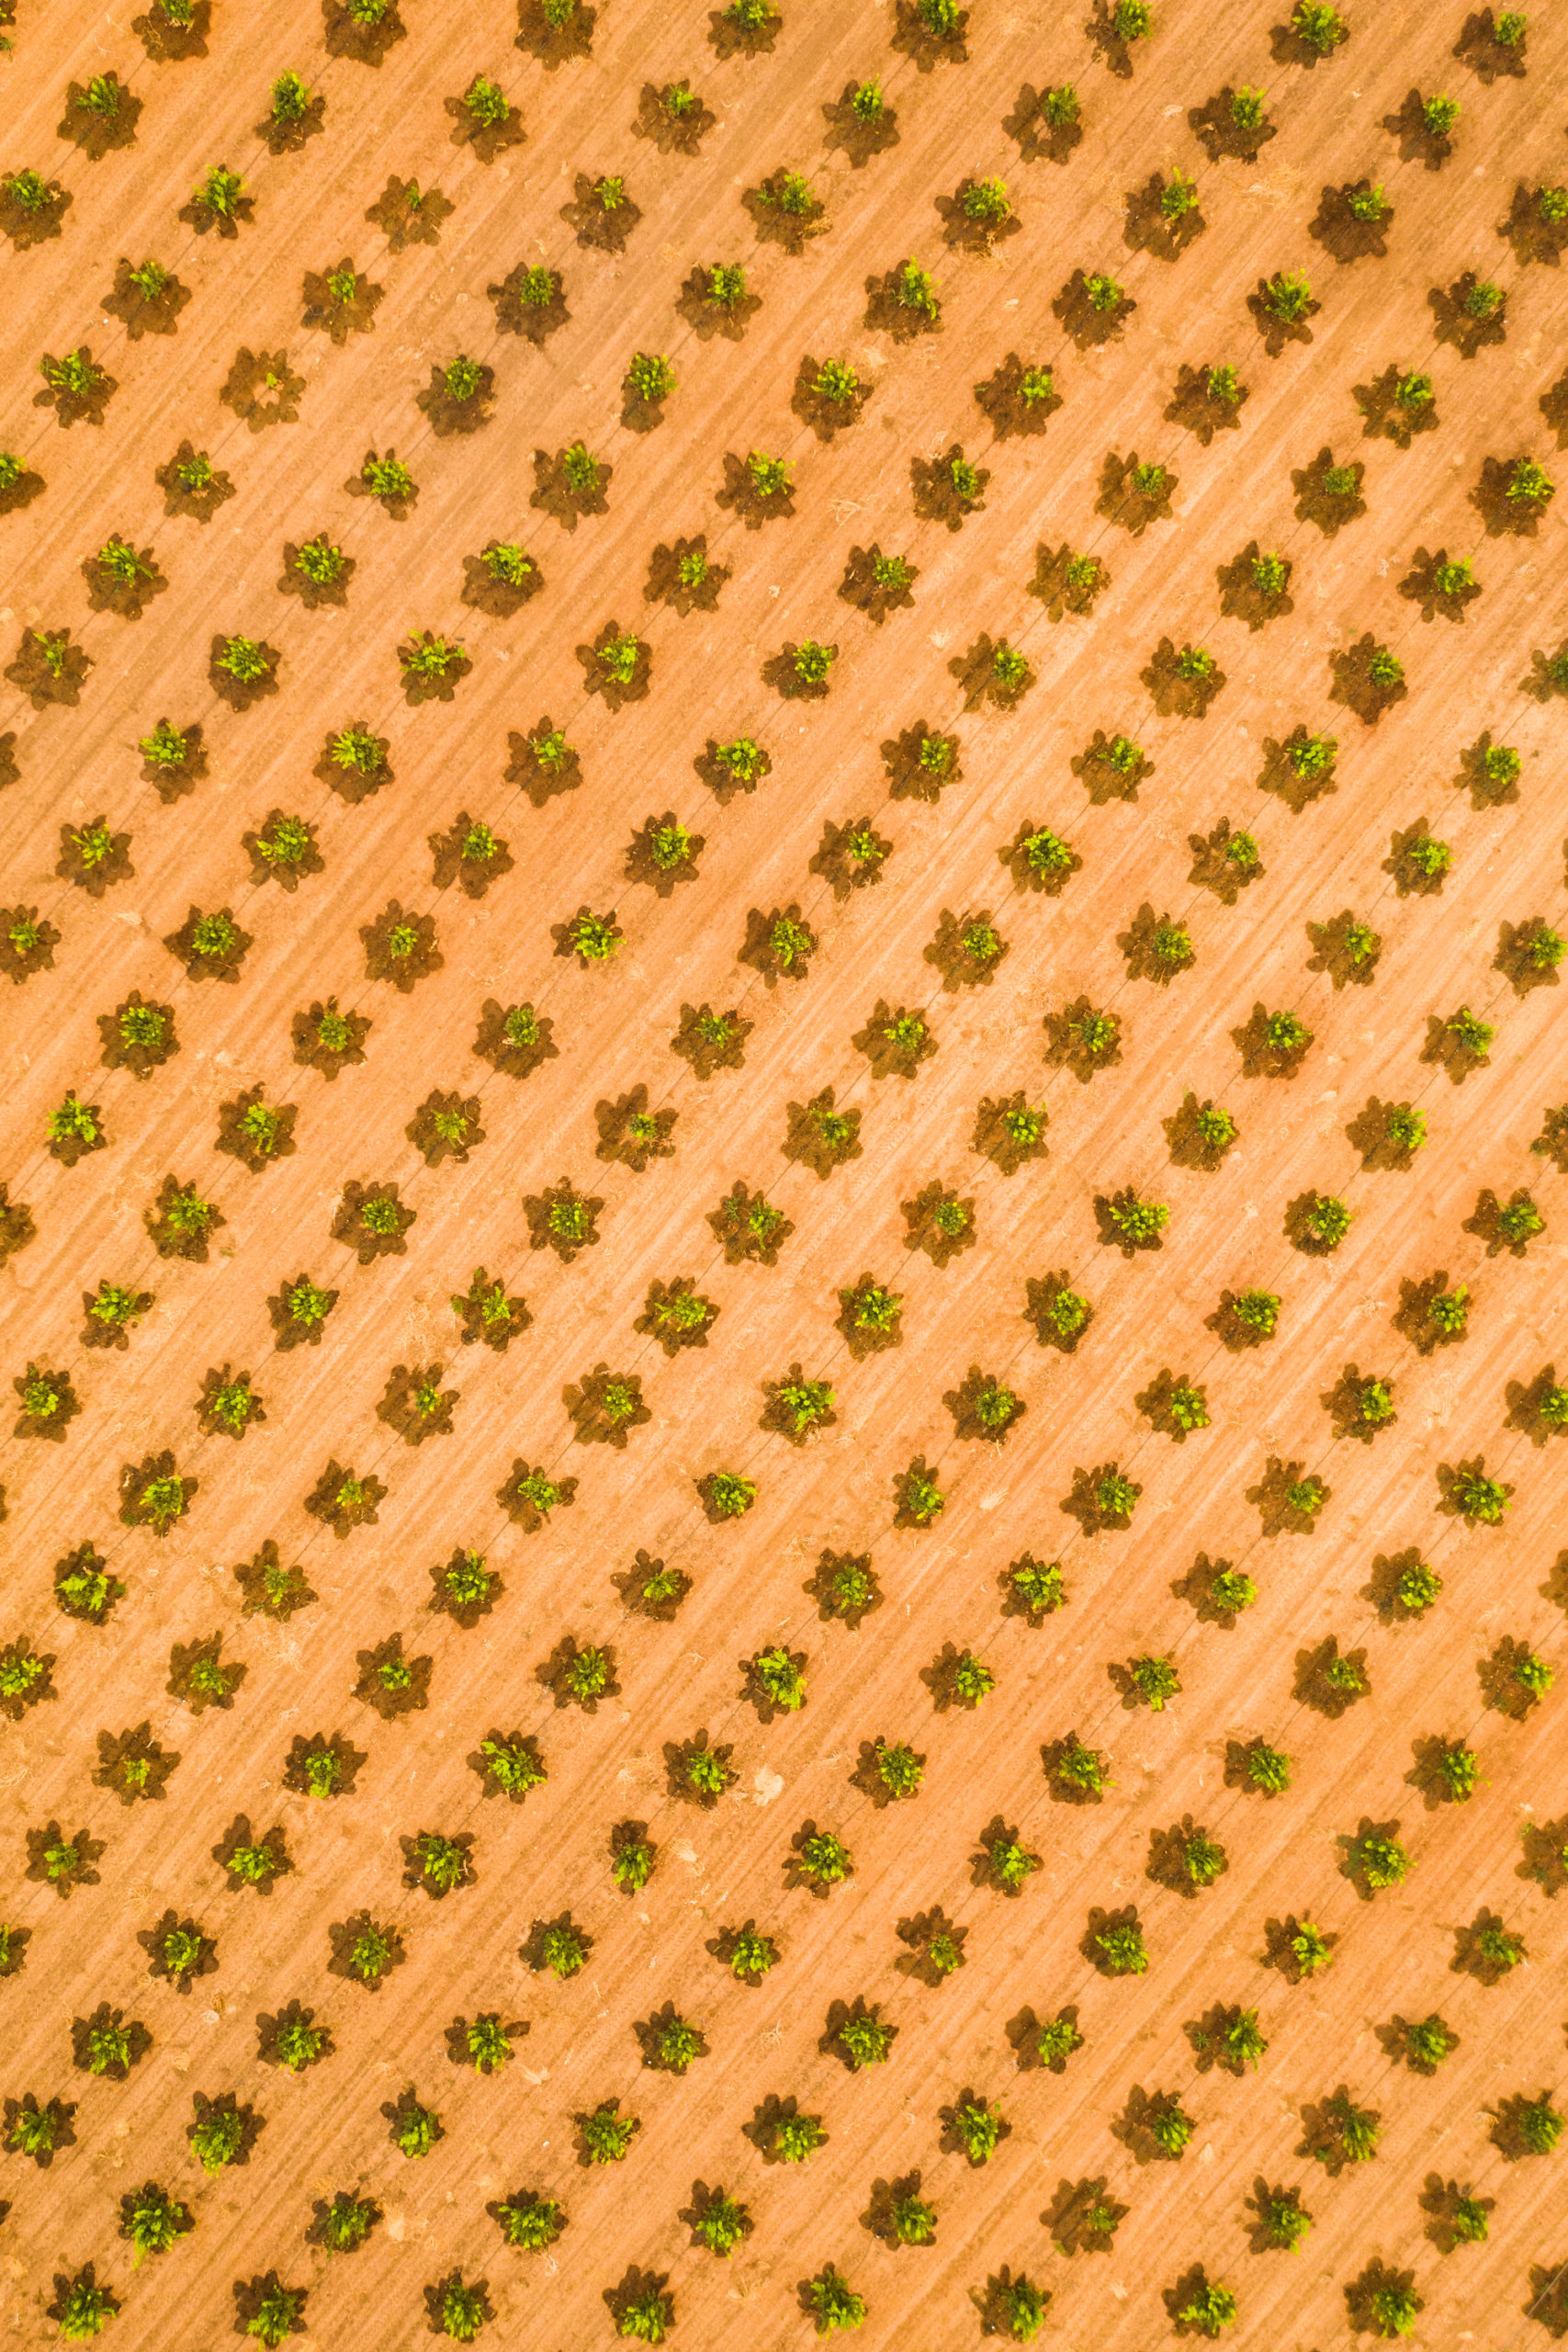 Fabric-like textures created by an overhead view of young citrus trees near Navelencia, California